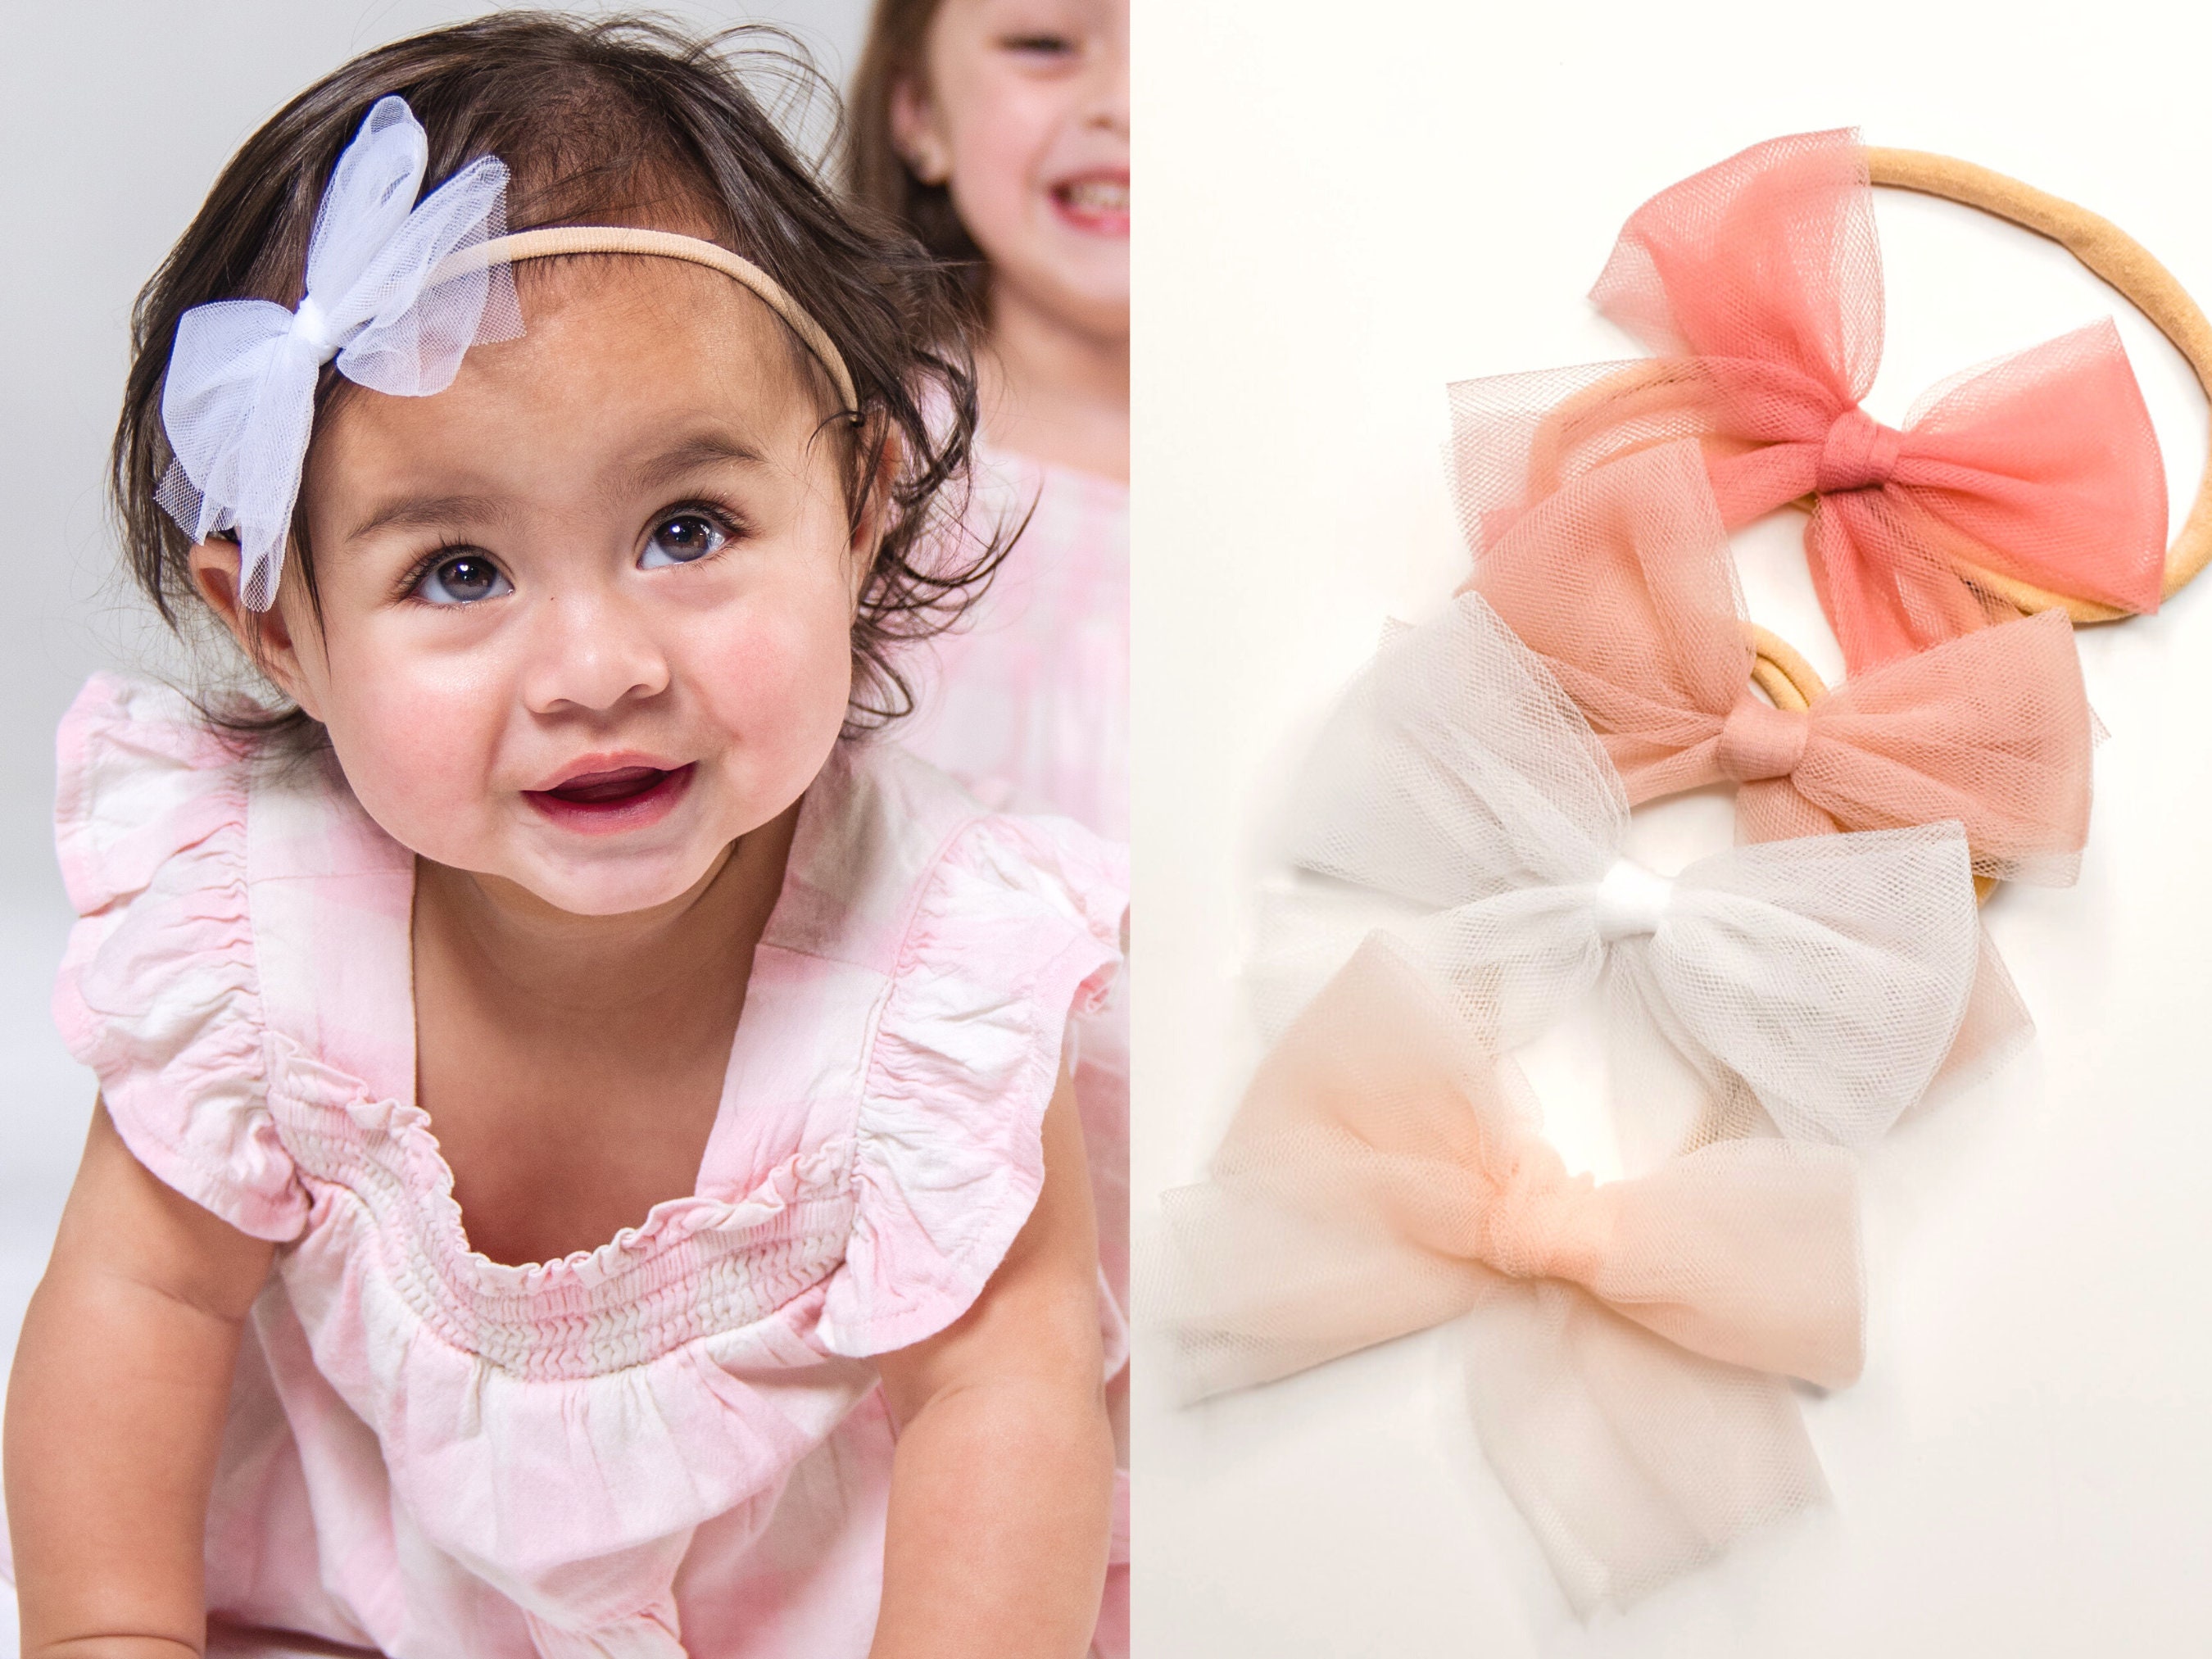 Blush Butterfly Tulle Bow Hair Clip or Shoe Clips with Scattered Pearls -  Girls Hair Accessories, Shoe Clips, Baby Headband